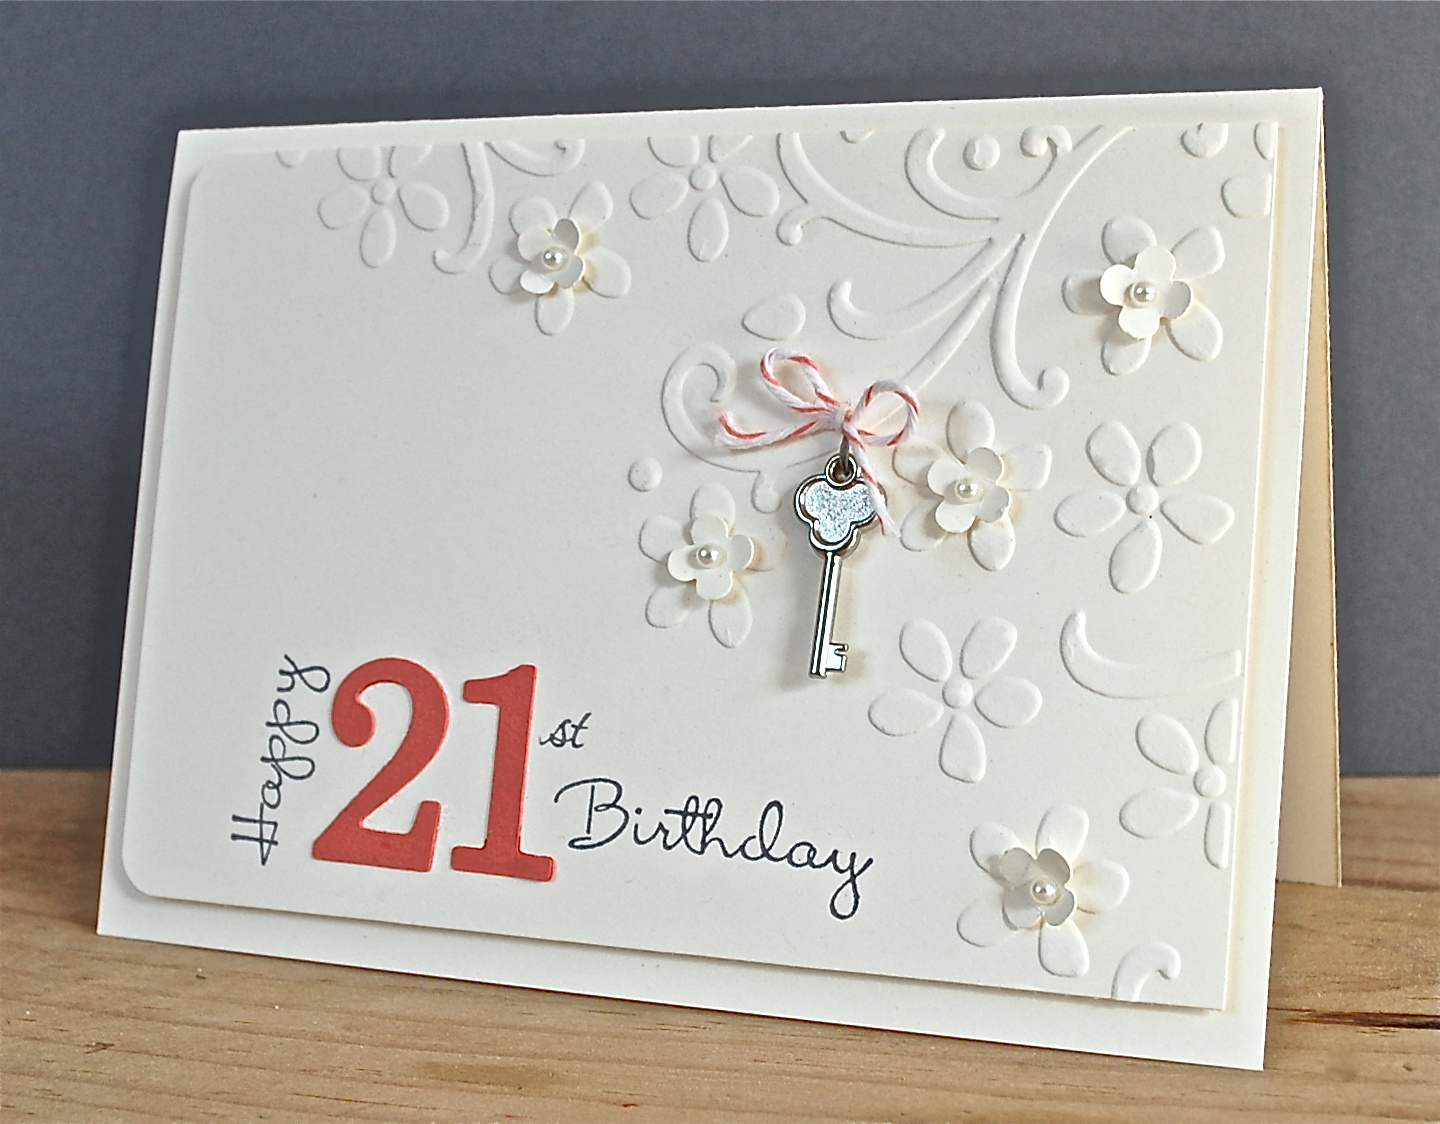 21 Birthday Card Ideas Crafting Ideas And Supplies From Vicky At Crafting Clares Paper